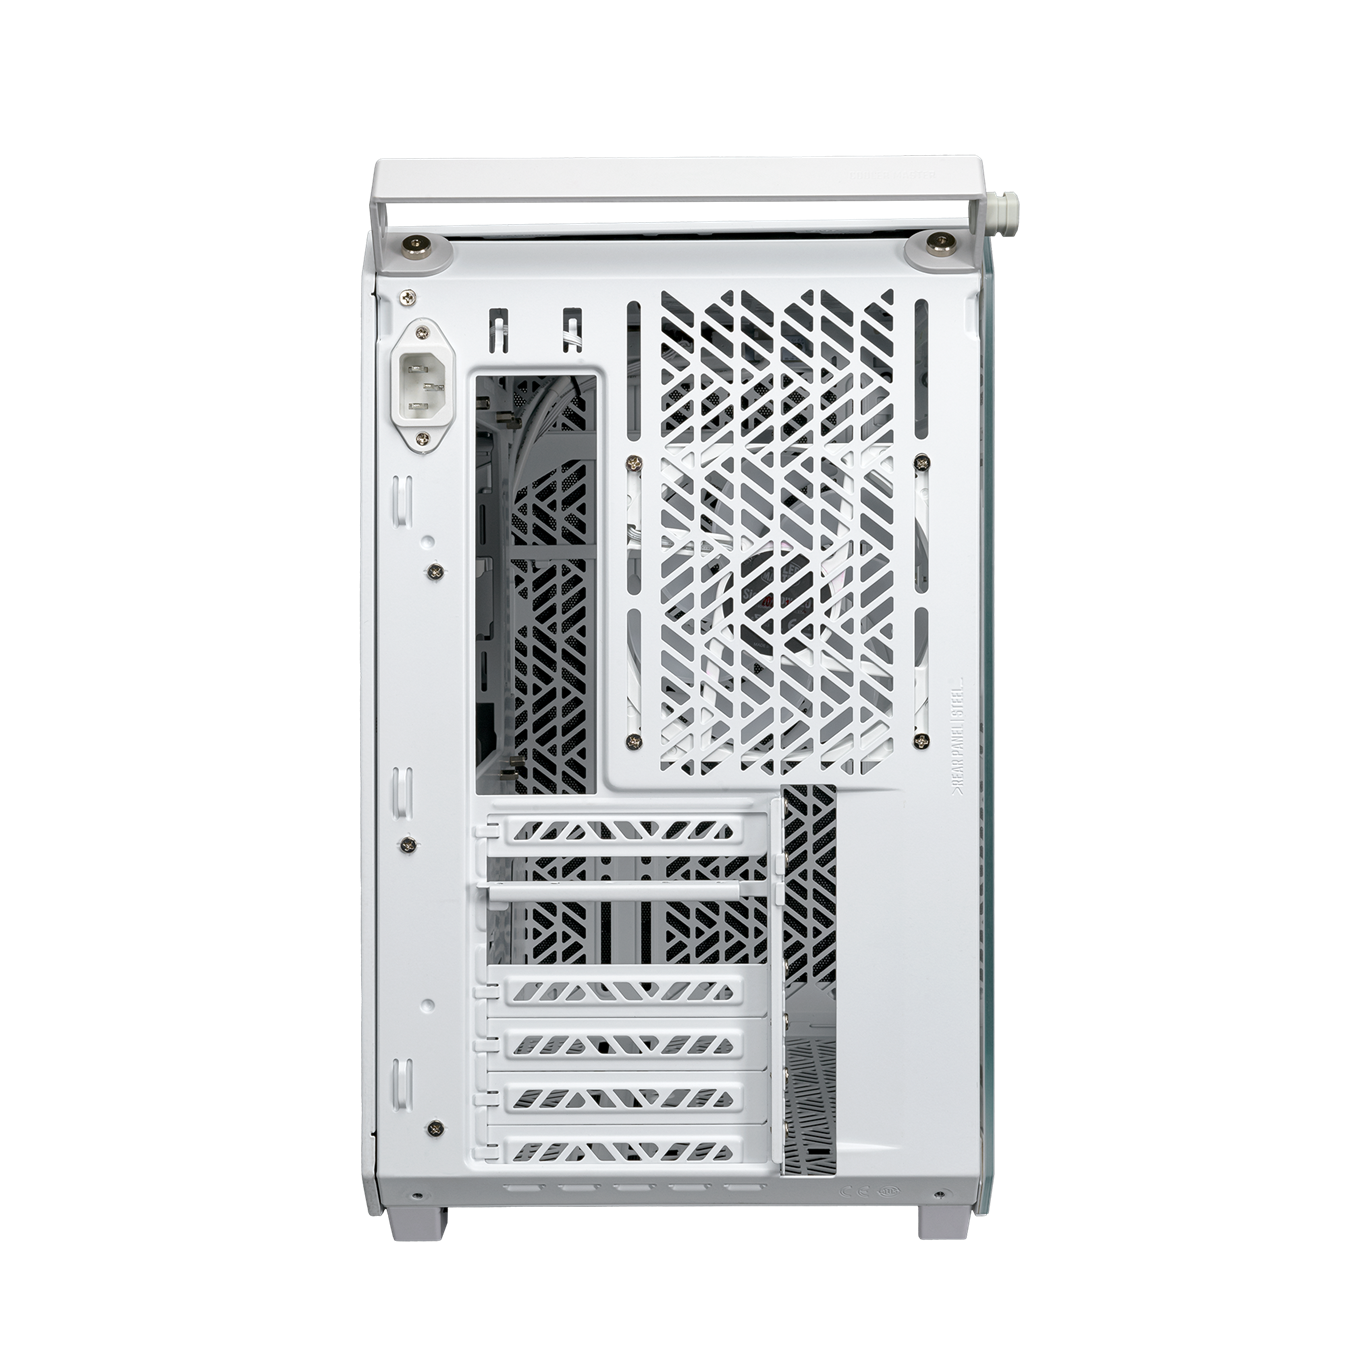 COOLER MASTER QUBE 500 FLATPACK QUBE Series ATX MID TOWER BLACK & WHITE EDITION CASE